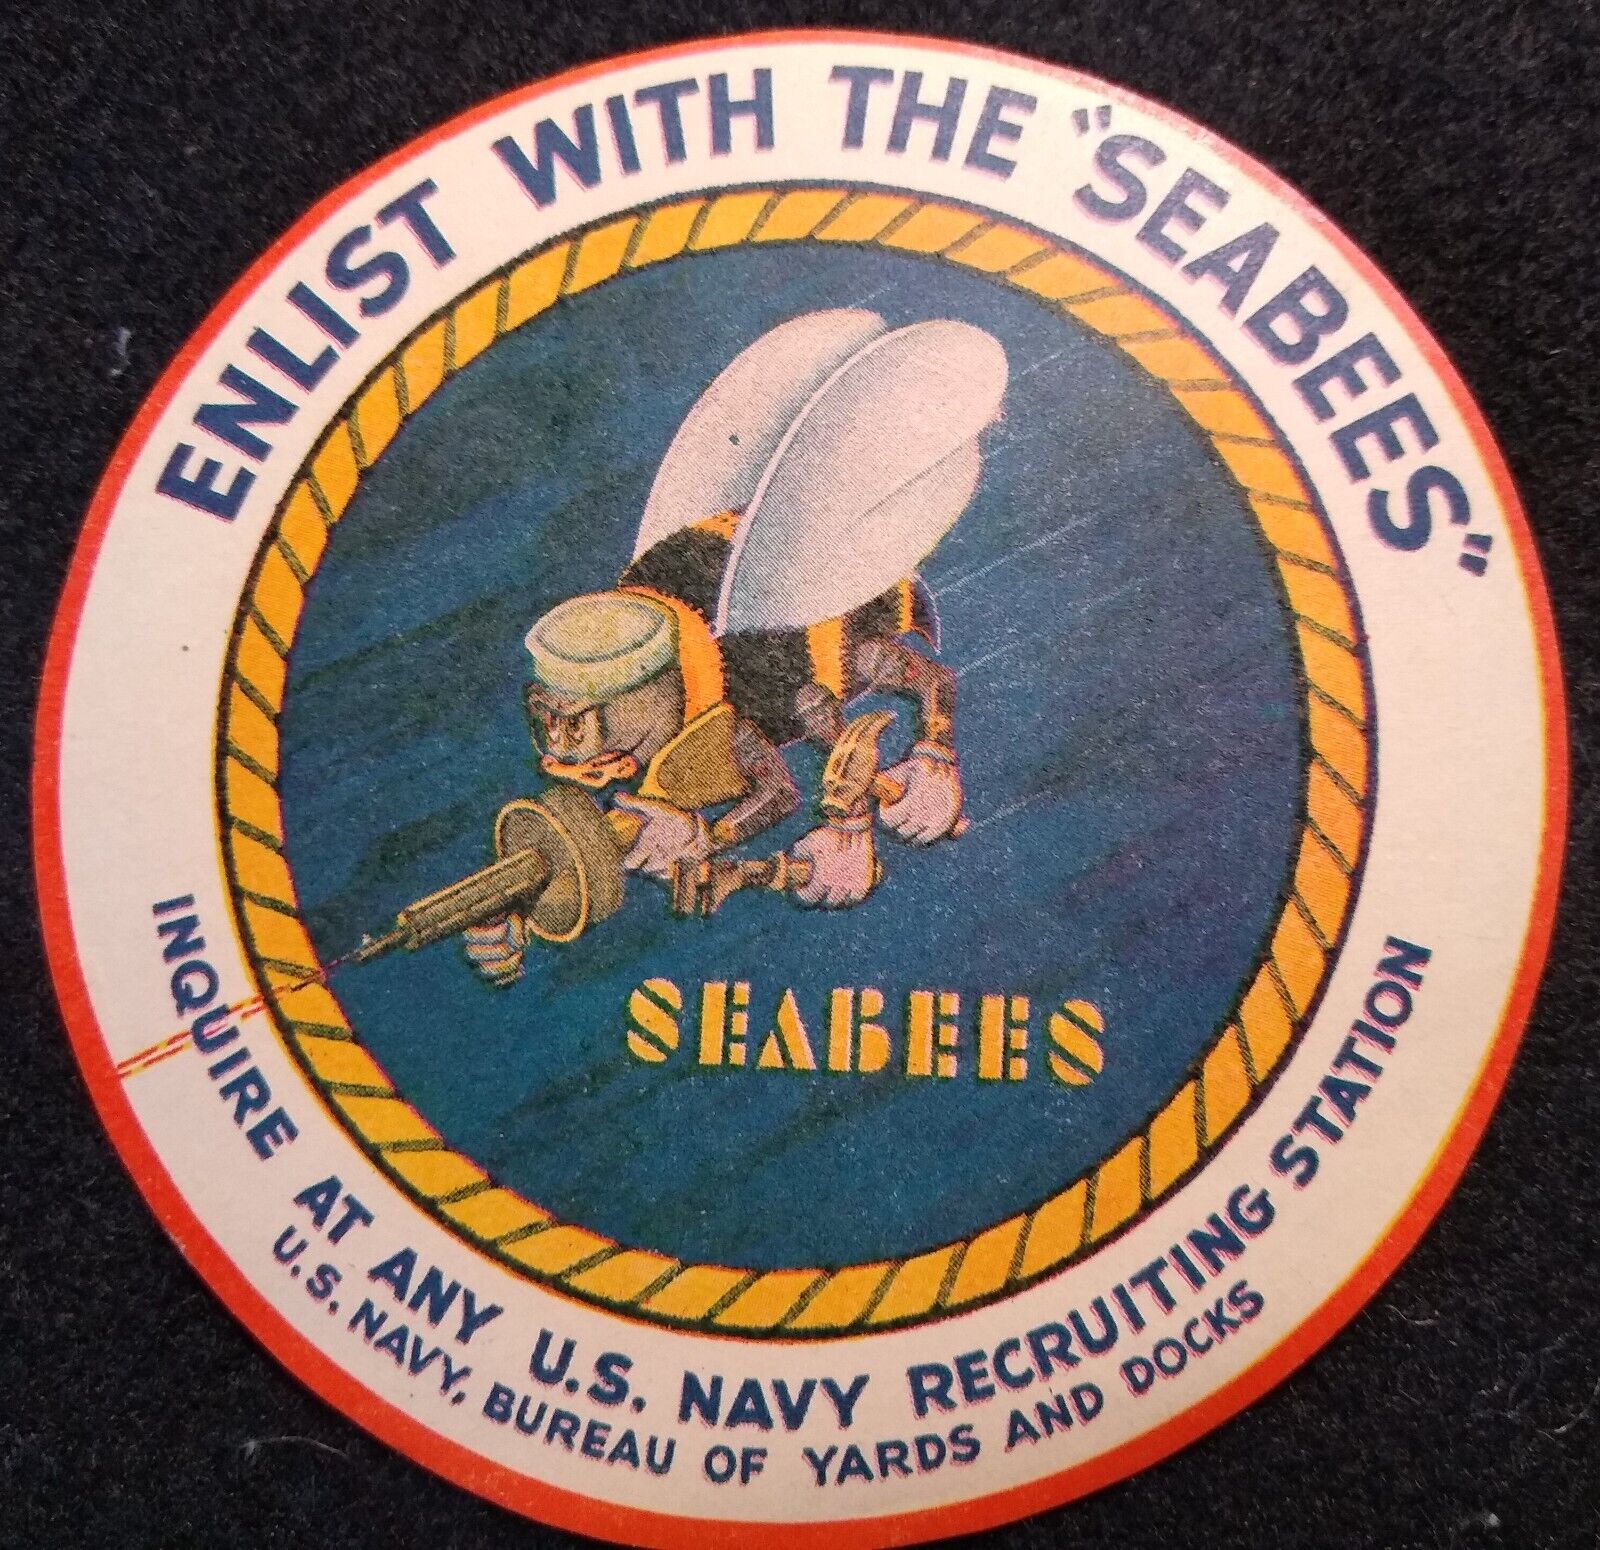 Original World War II Enlist with The Seabees Recruiting Large Sticker